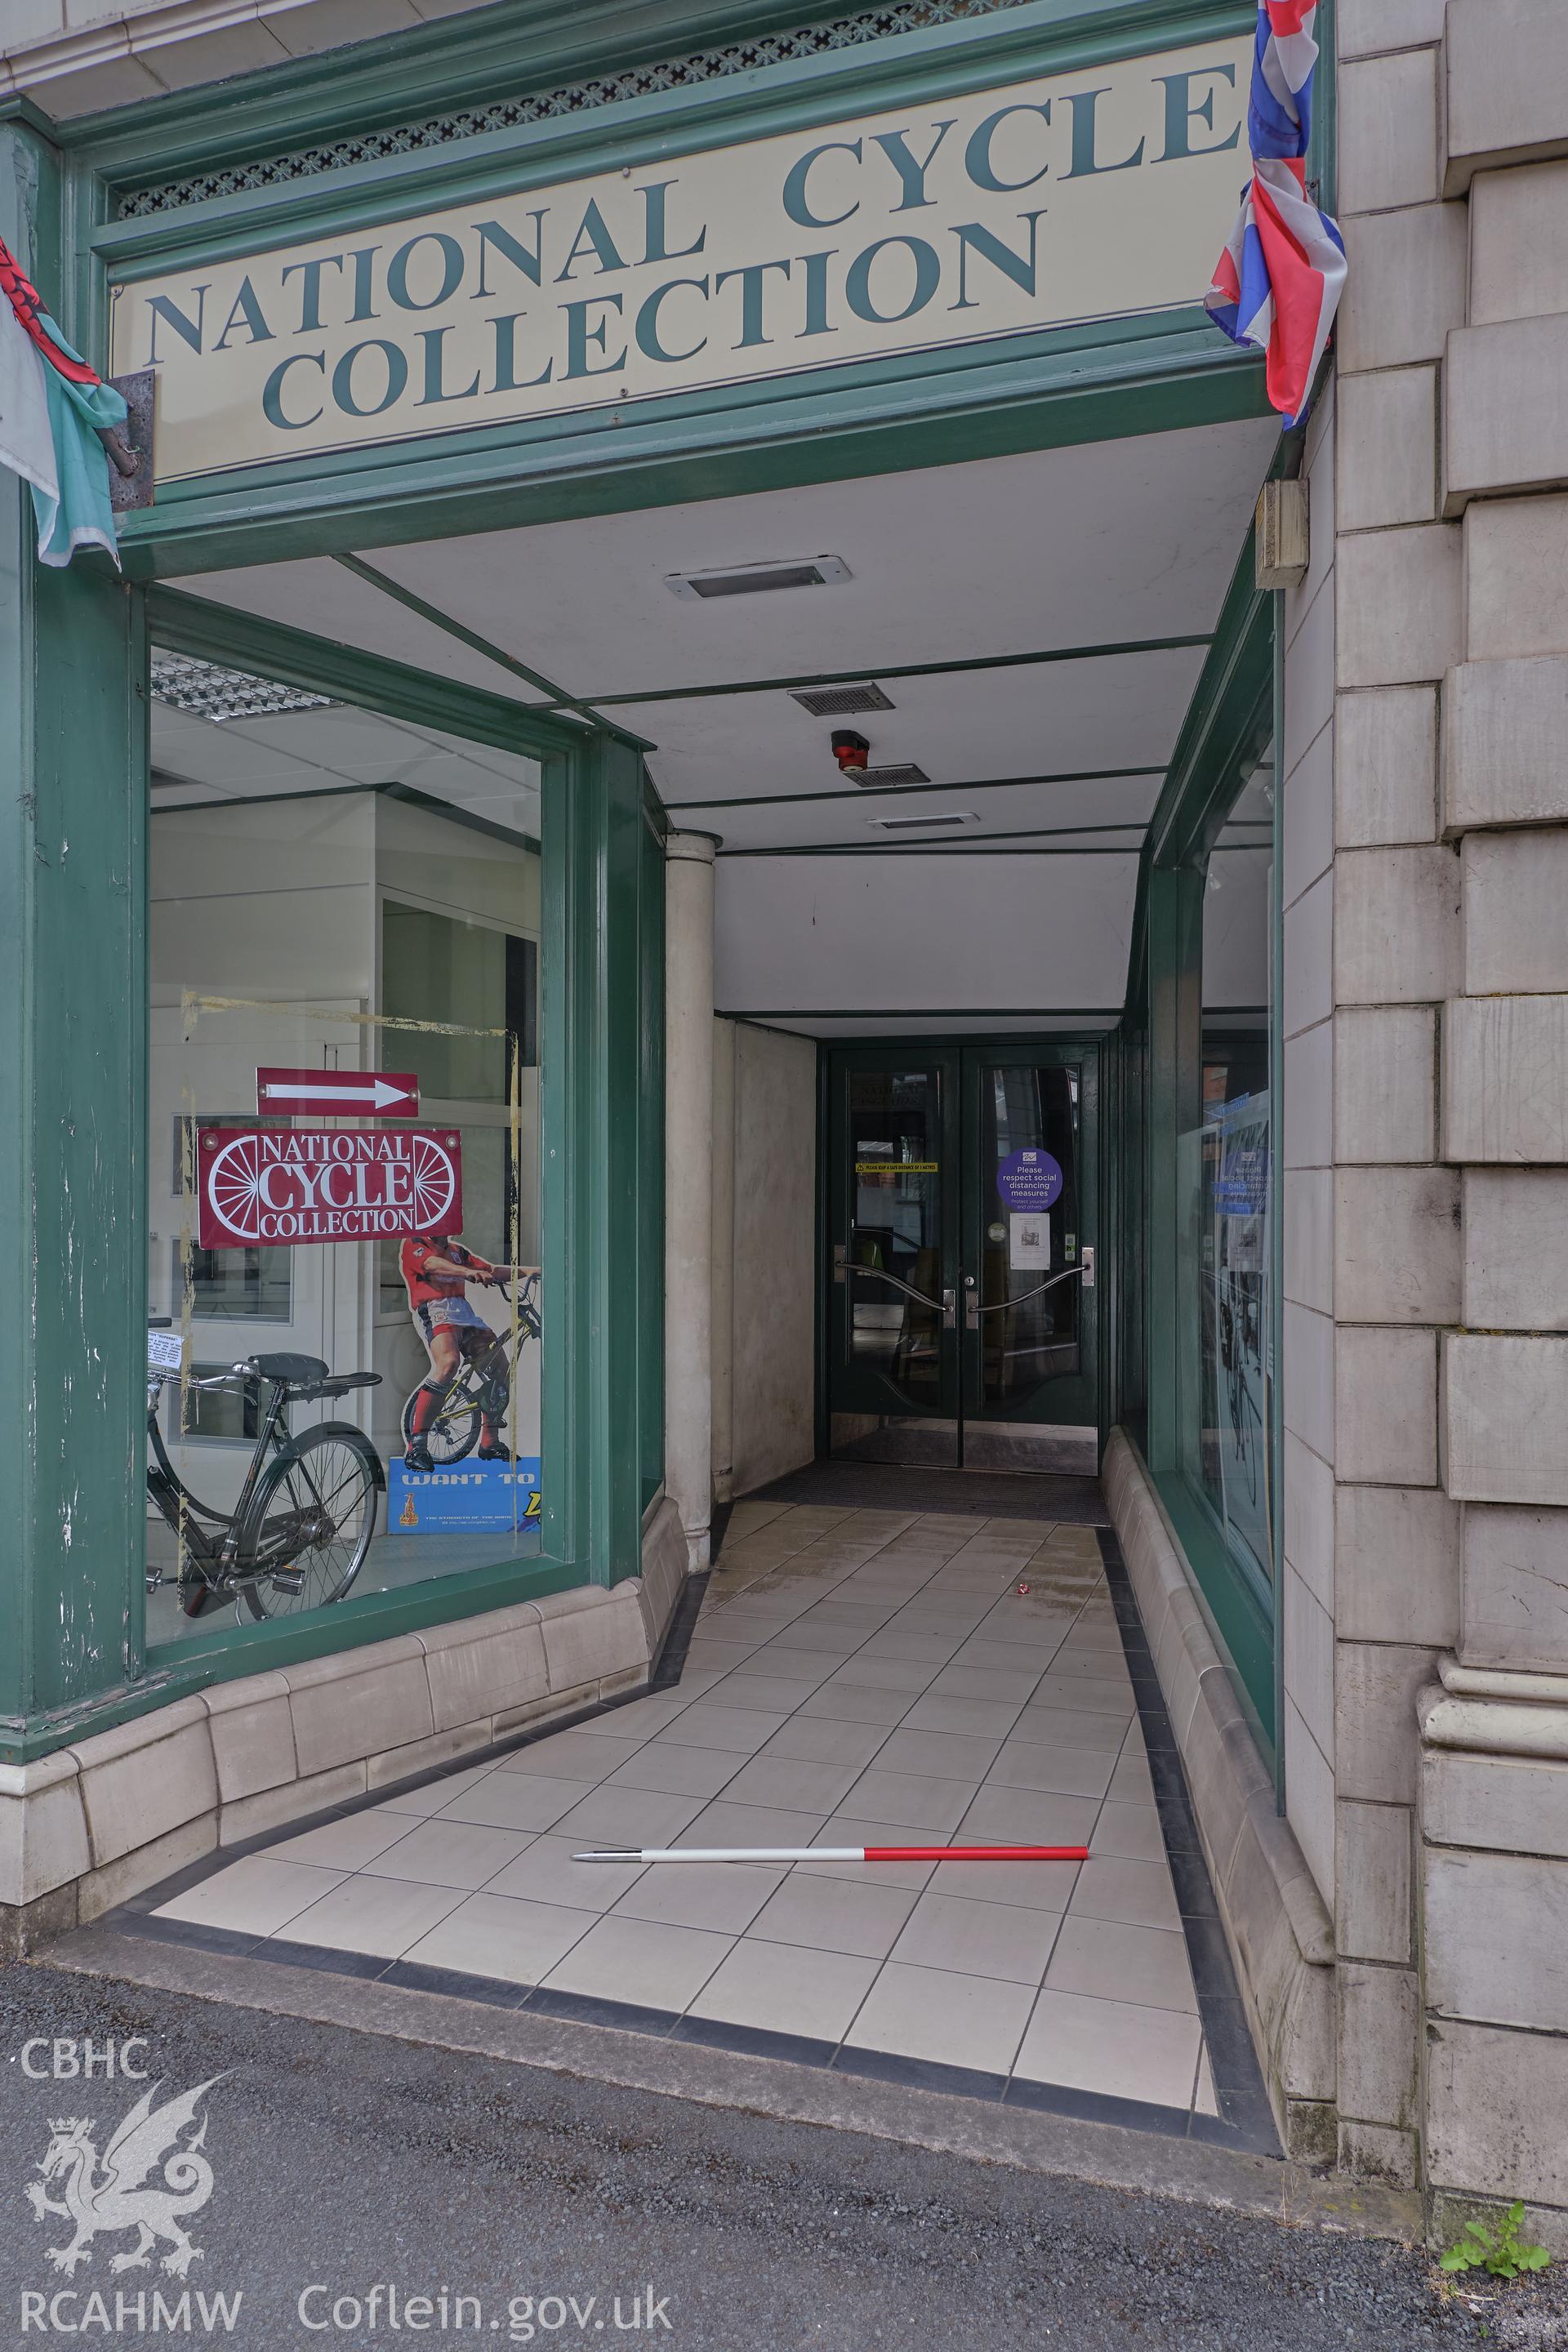 Colour photograph showing Automobile Palace - bay 8 entrance, Temple Street, looking S. Produced as part of Historic Building Recording for Automobile Palace, carried out by Richard Hayman, June 2021.